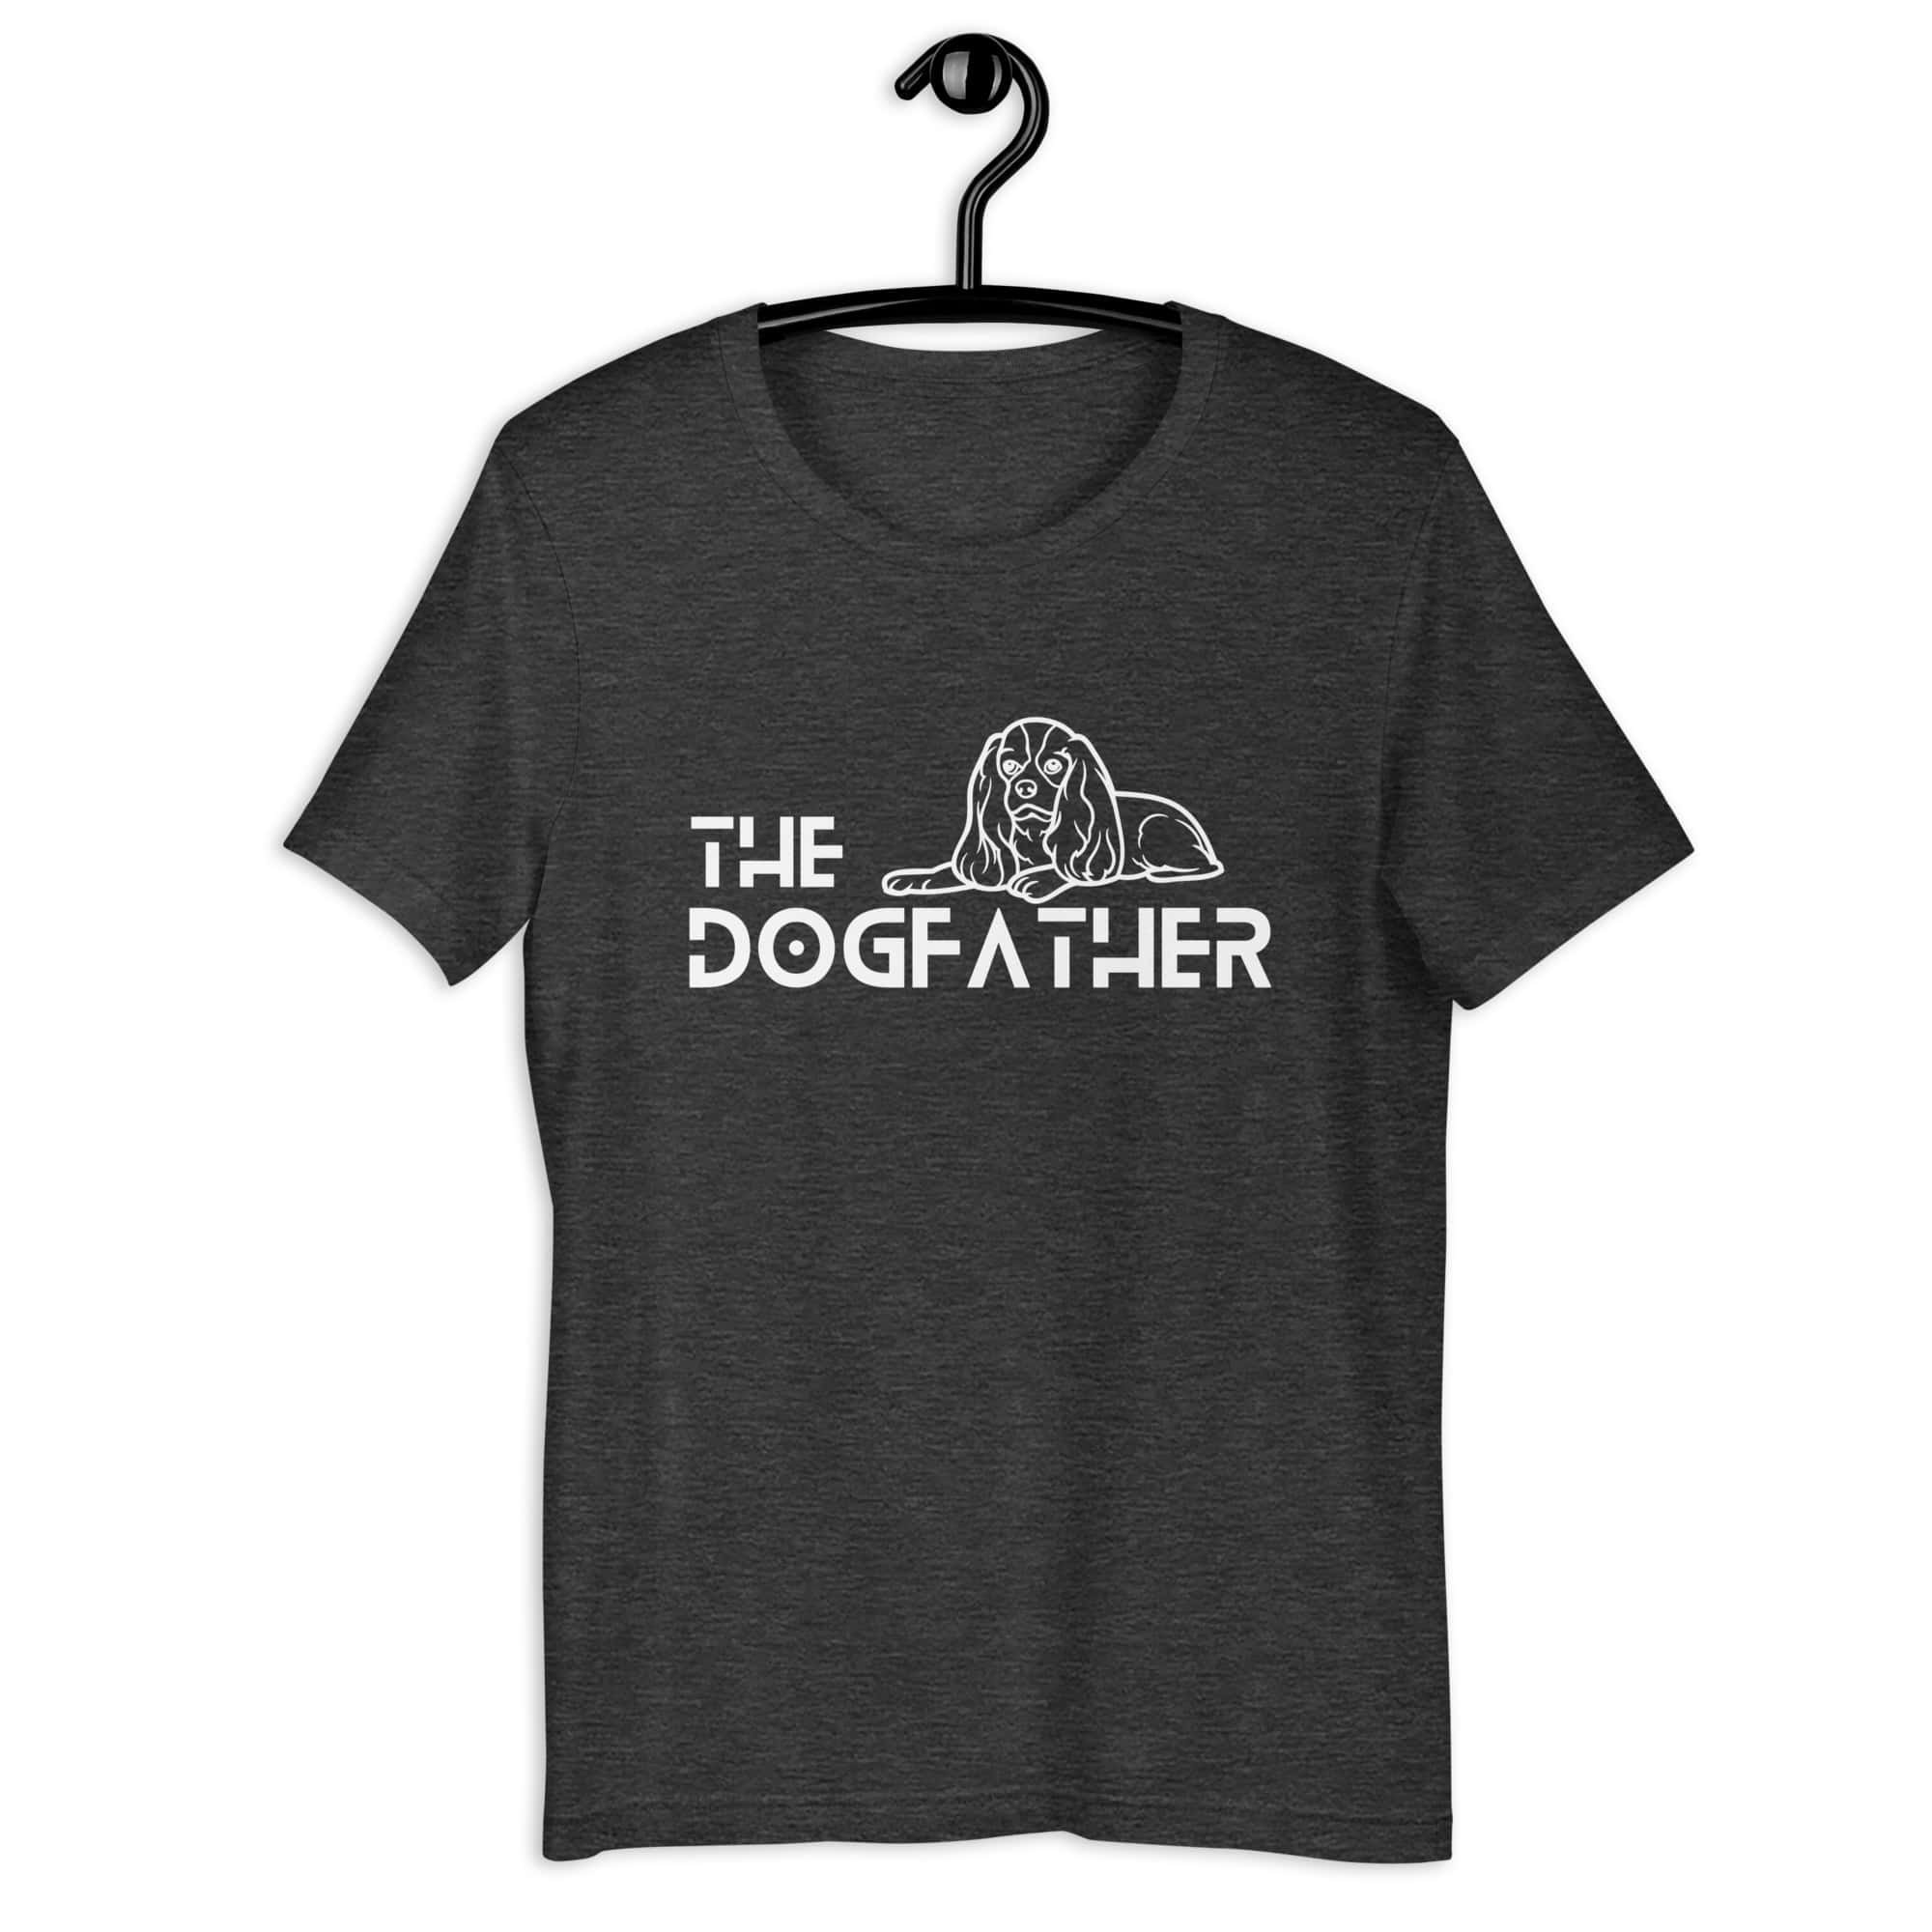 The Dogfather Hounds Unisex T-Shirt. Dark Grey